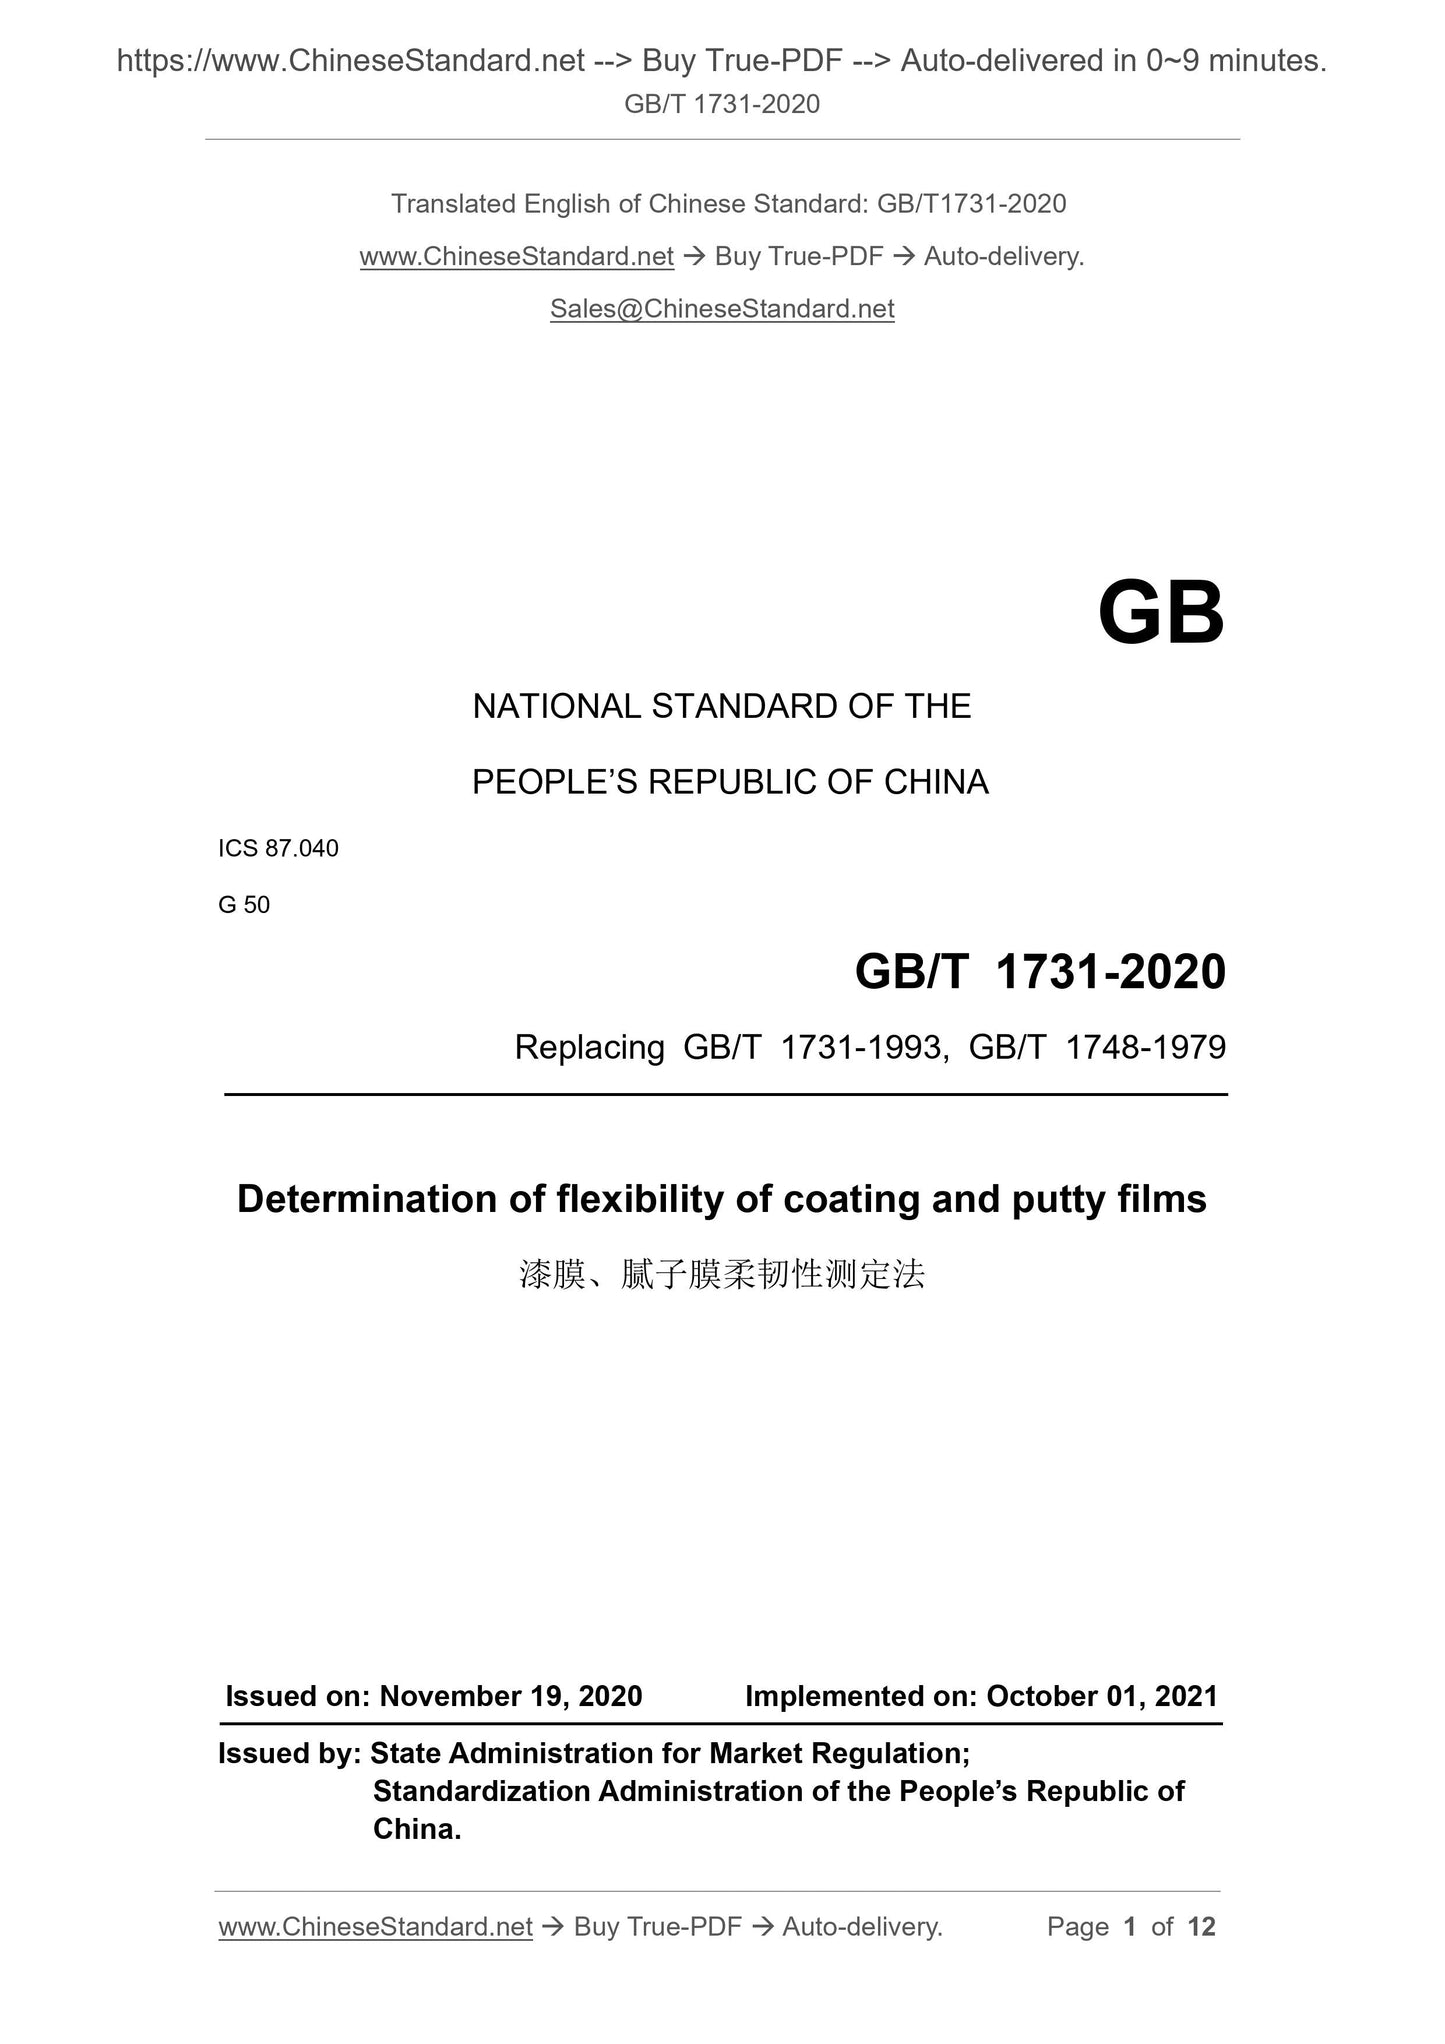 GB/T 1731-2020 Page 1